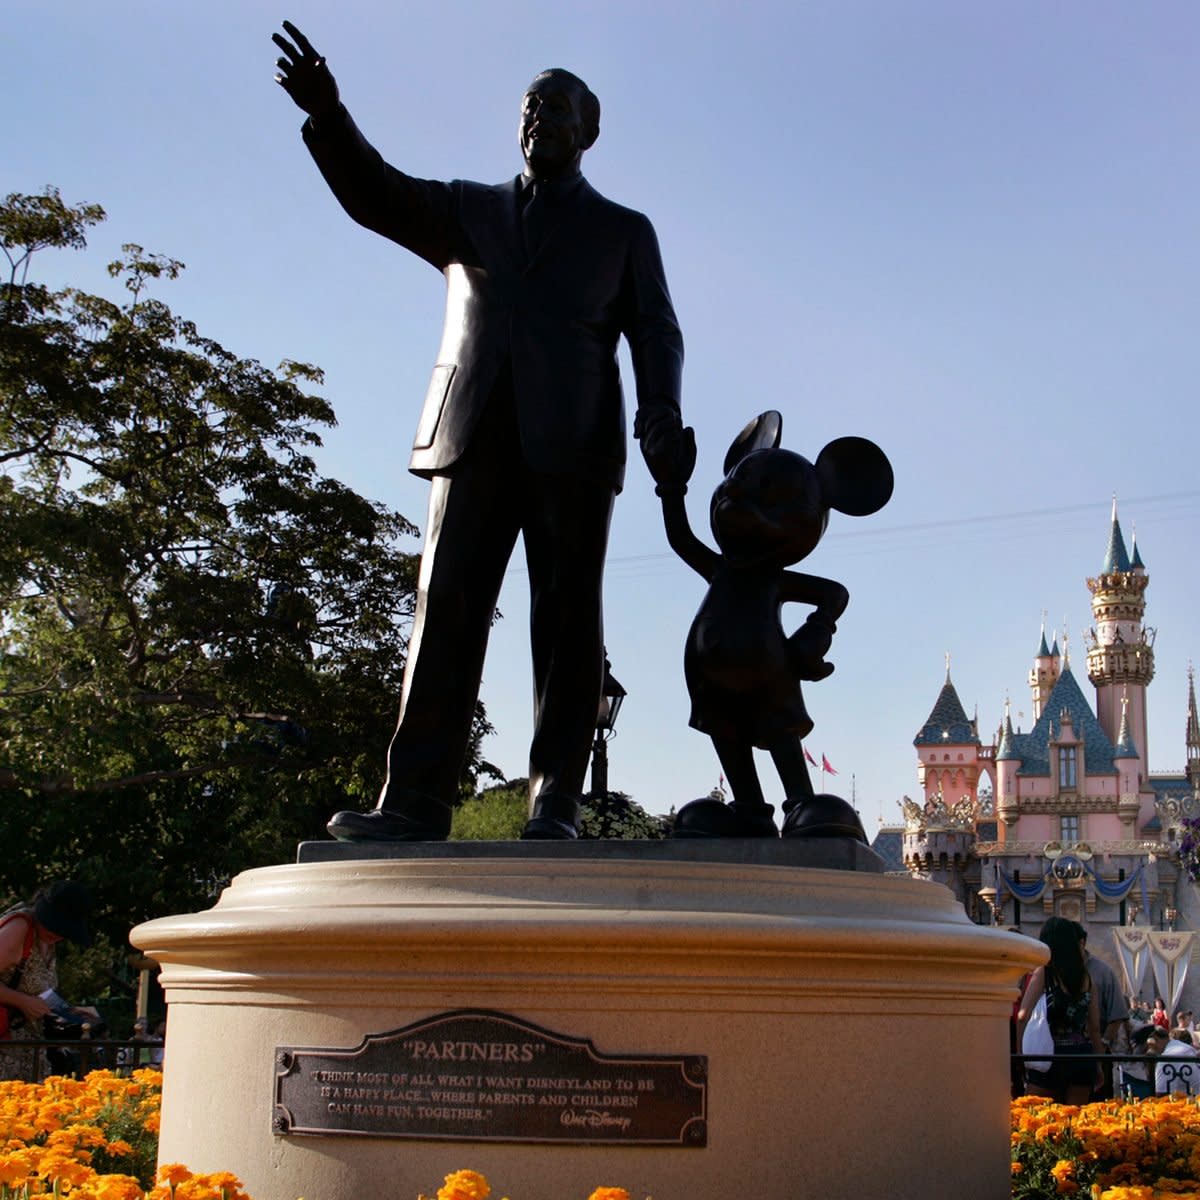 Sleeping Beauty's Castle can be seen in the backround as people make their way past the "Partners" statue (depicting Walt Disney and Mickey Mouse) at Disneyland, Friday July 15, 2005, in Anaheim. Disneyland celebrated its 50th anniversary on July 17, 2005. (Photo by Richard Hartog/Los Angeles Times via Getty Images)